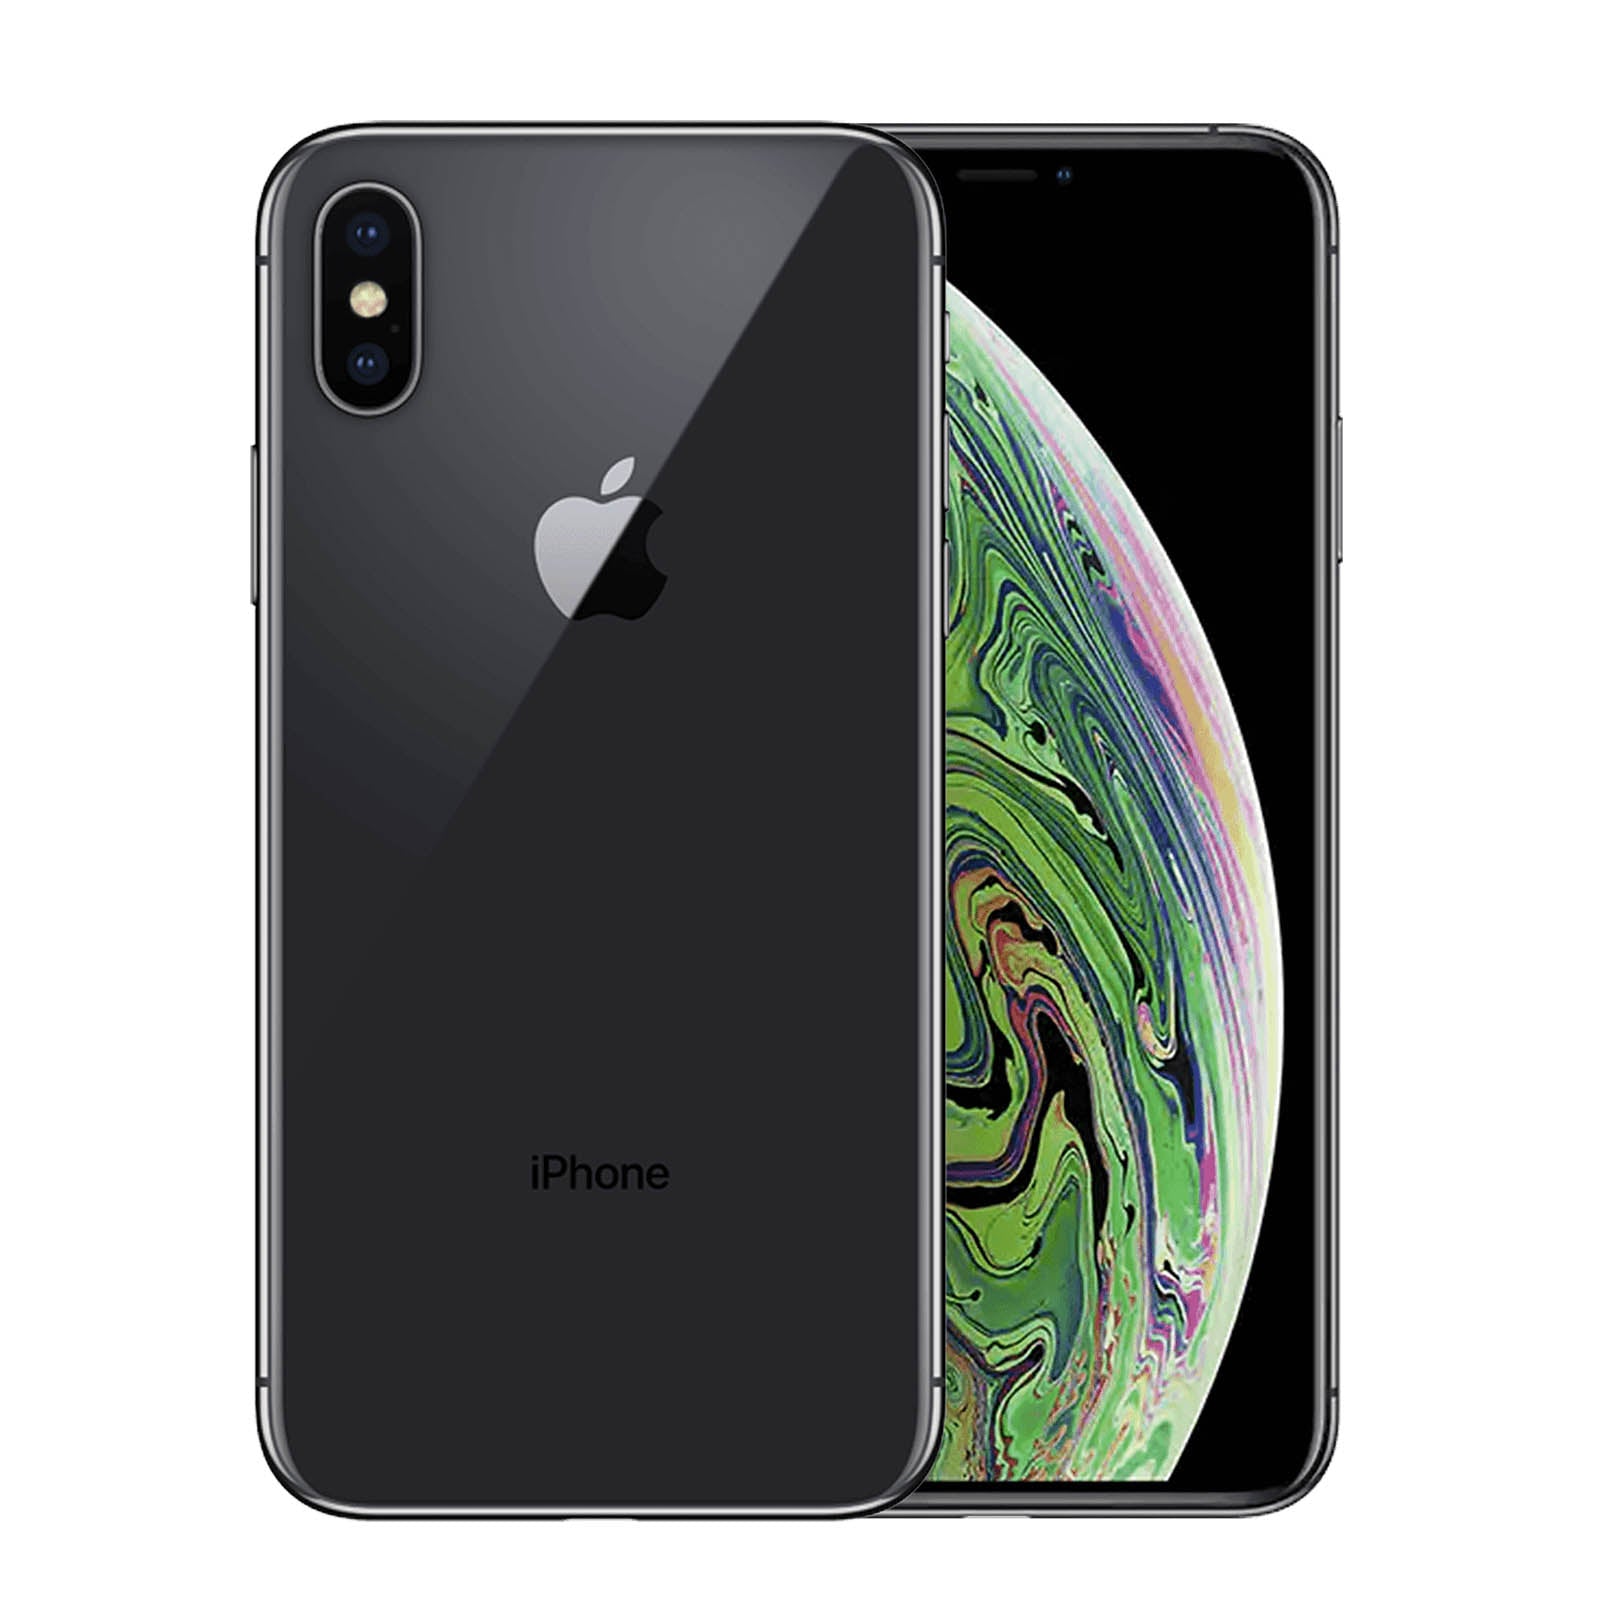 iPhone Xs Max Space Gray 256 GB au